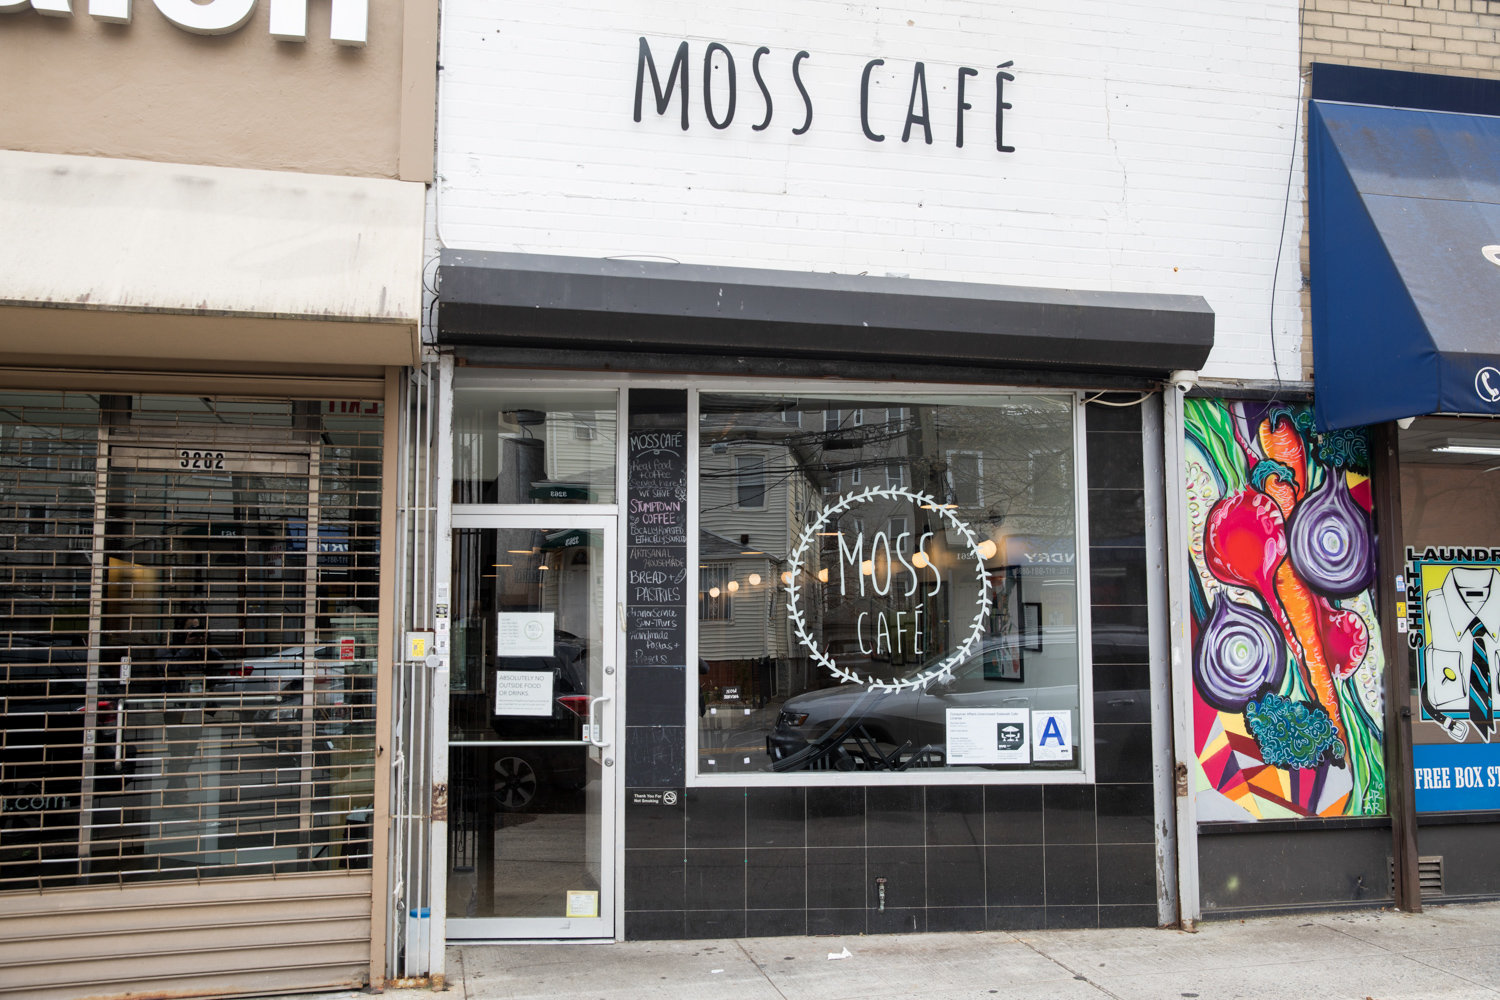 Moss Cafe temporarily closed its Johnson Avenue doors March 19 in a bid to get ahead of any statewide shutdown surrounding the coronavirus pandemic. It is unclear when it might reopen.